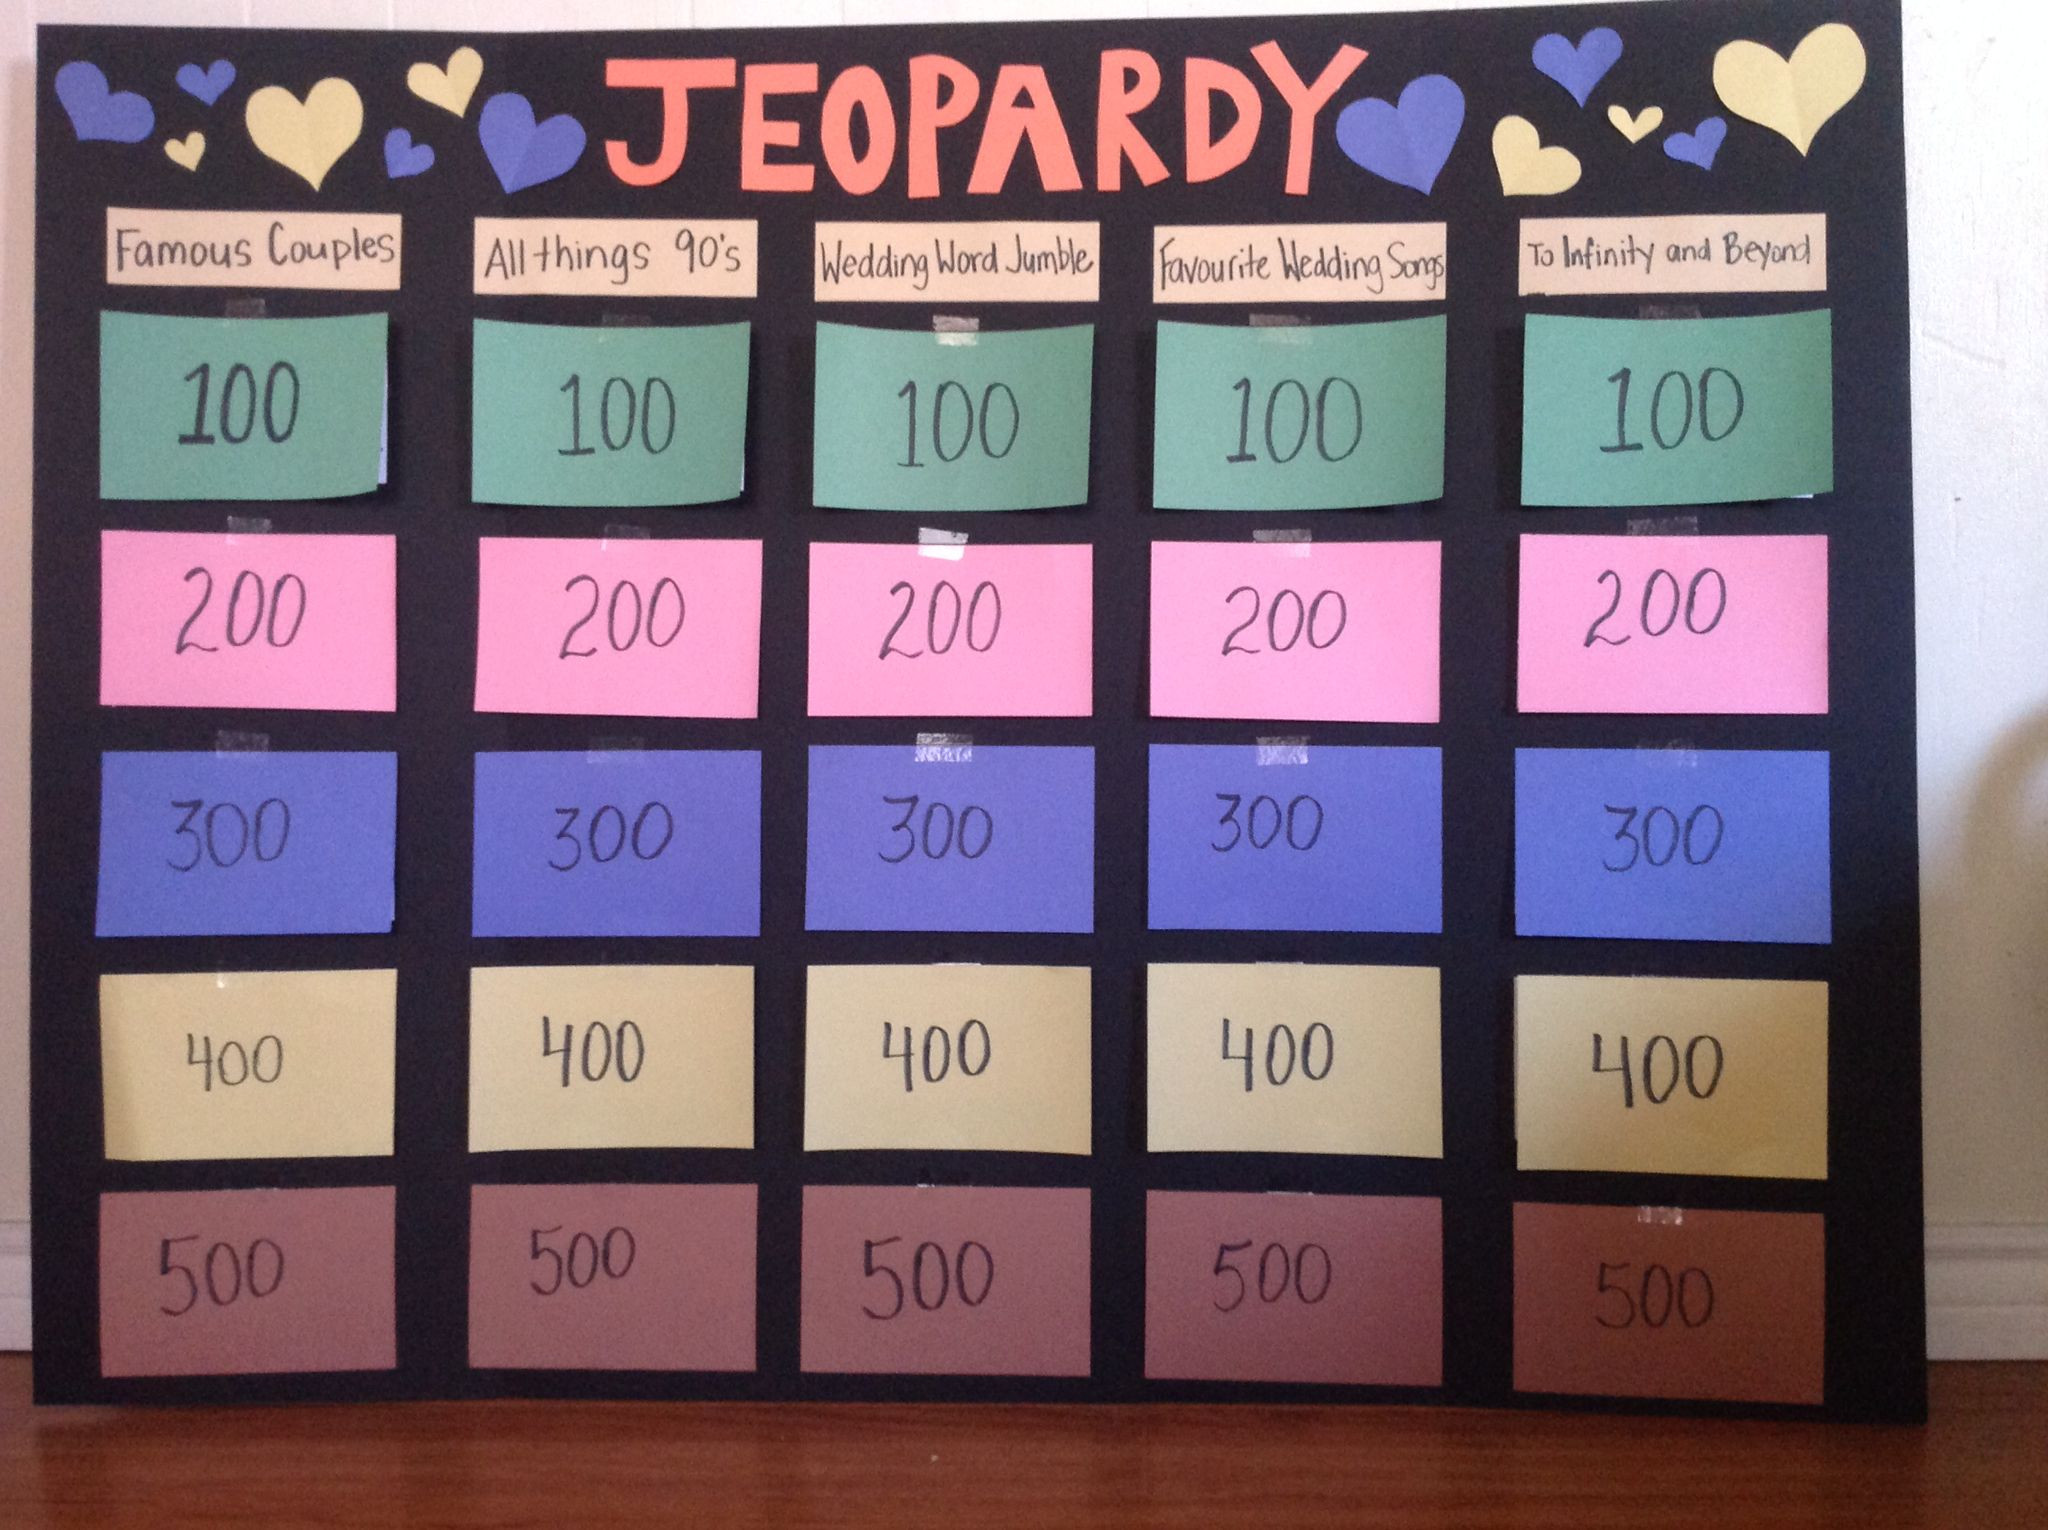 Jack And Jill Bachelor Bachelorette Party Ideas
 Jeopardy game for Jack and Jill party Fun